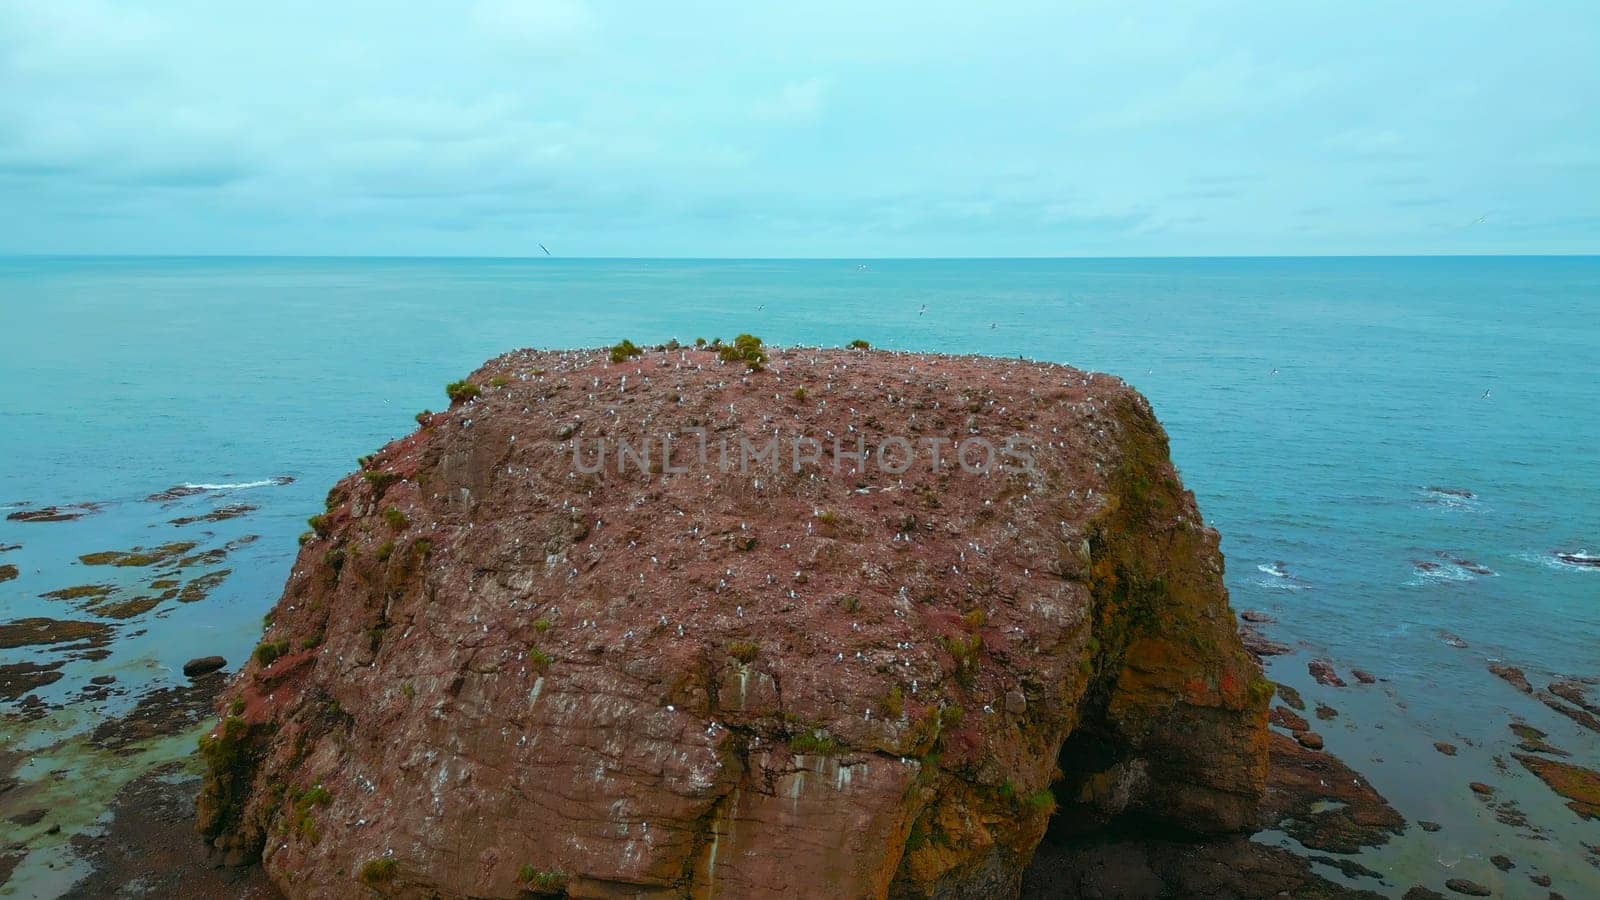 Sea rock with house for seagulls. Clip. Top view of sea cliff with flying gulls on background of sea horizon. Cinematic view with rock and seagulls in sea.